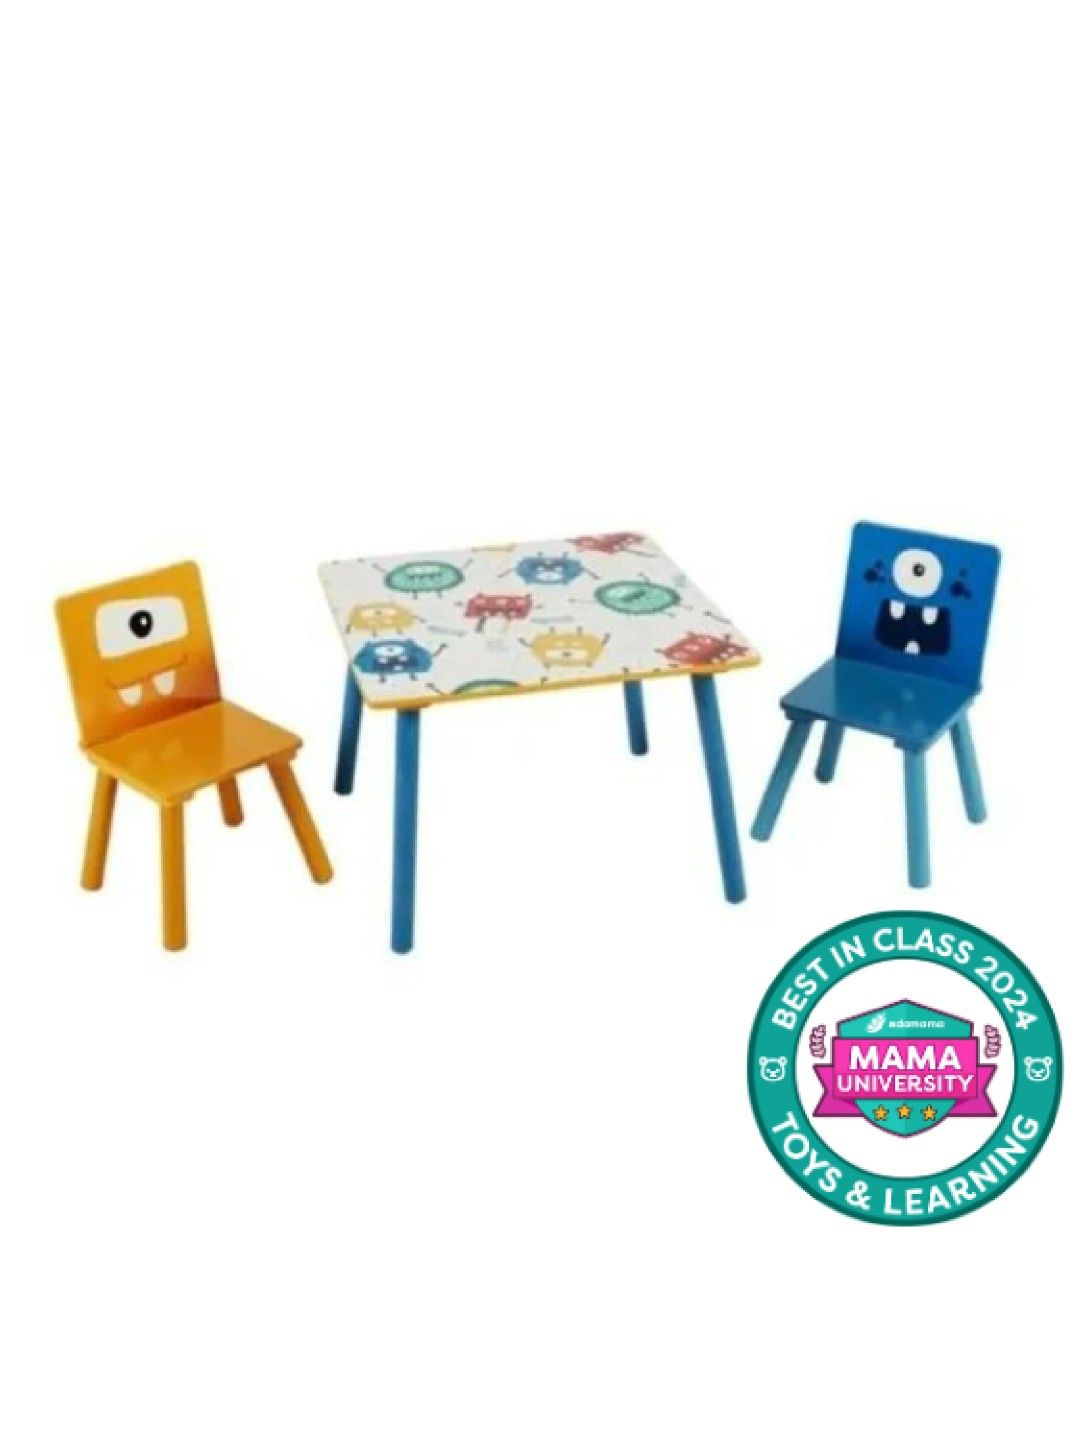 Harper & Chase Table and Chair Set (Blue Monster Design)